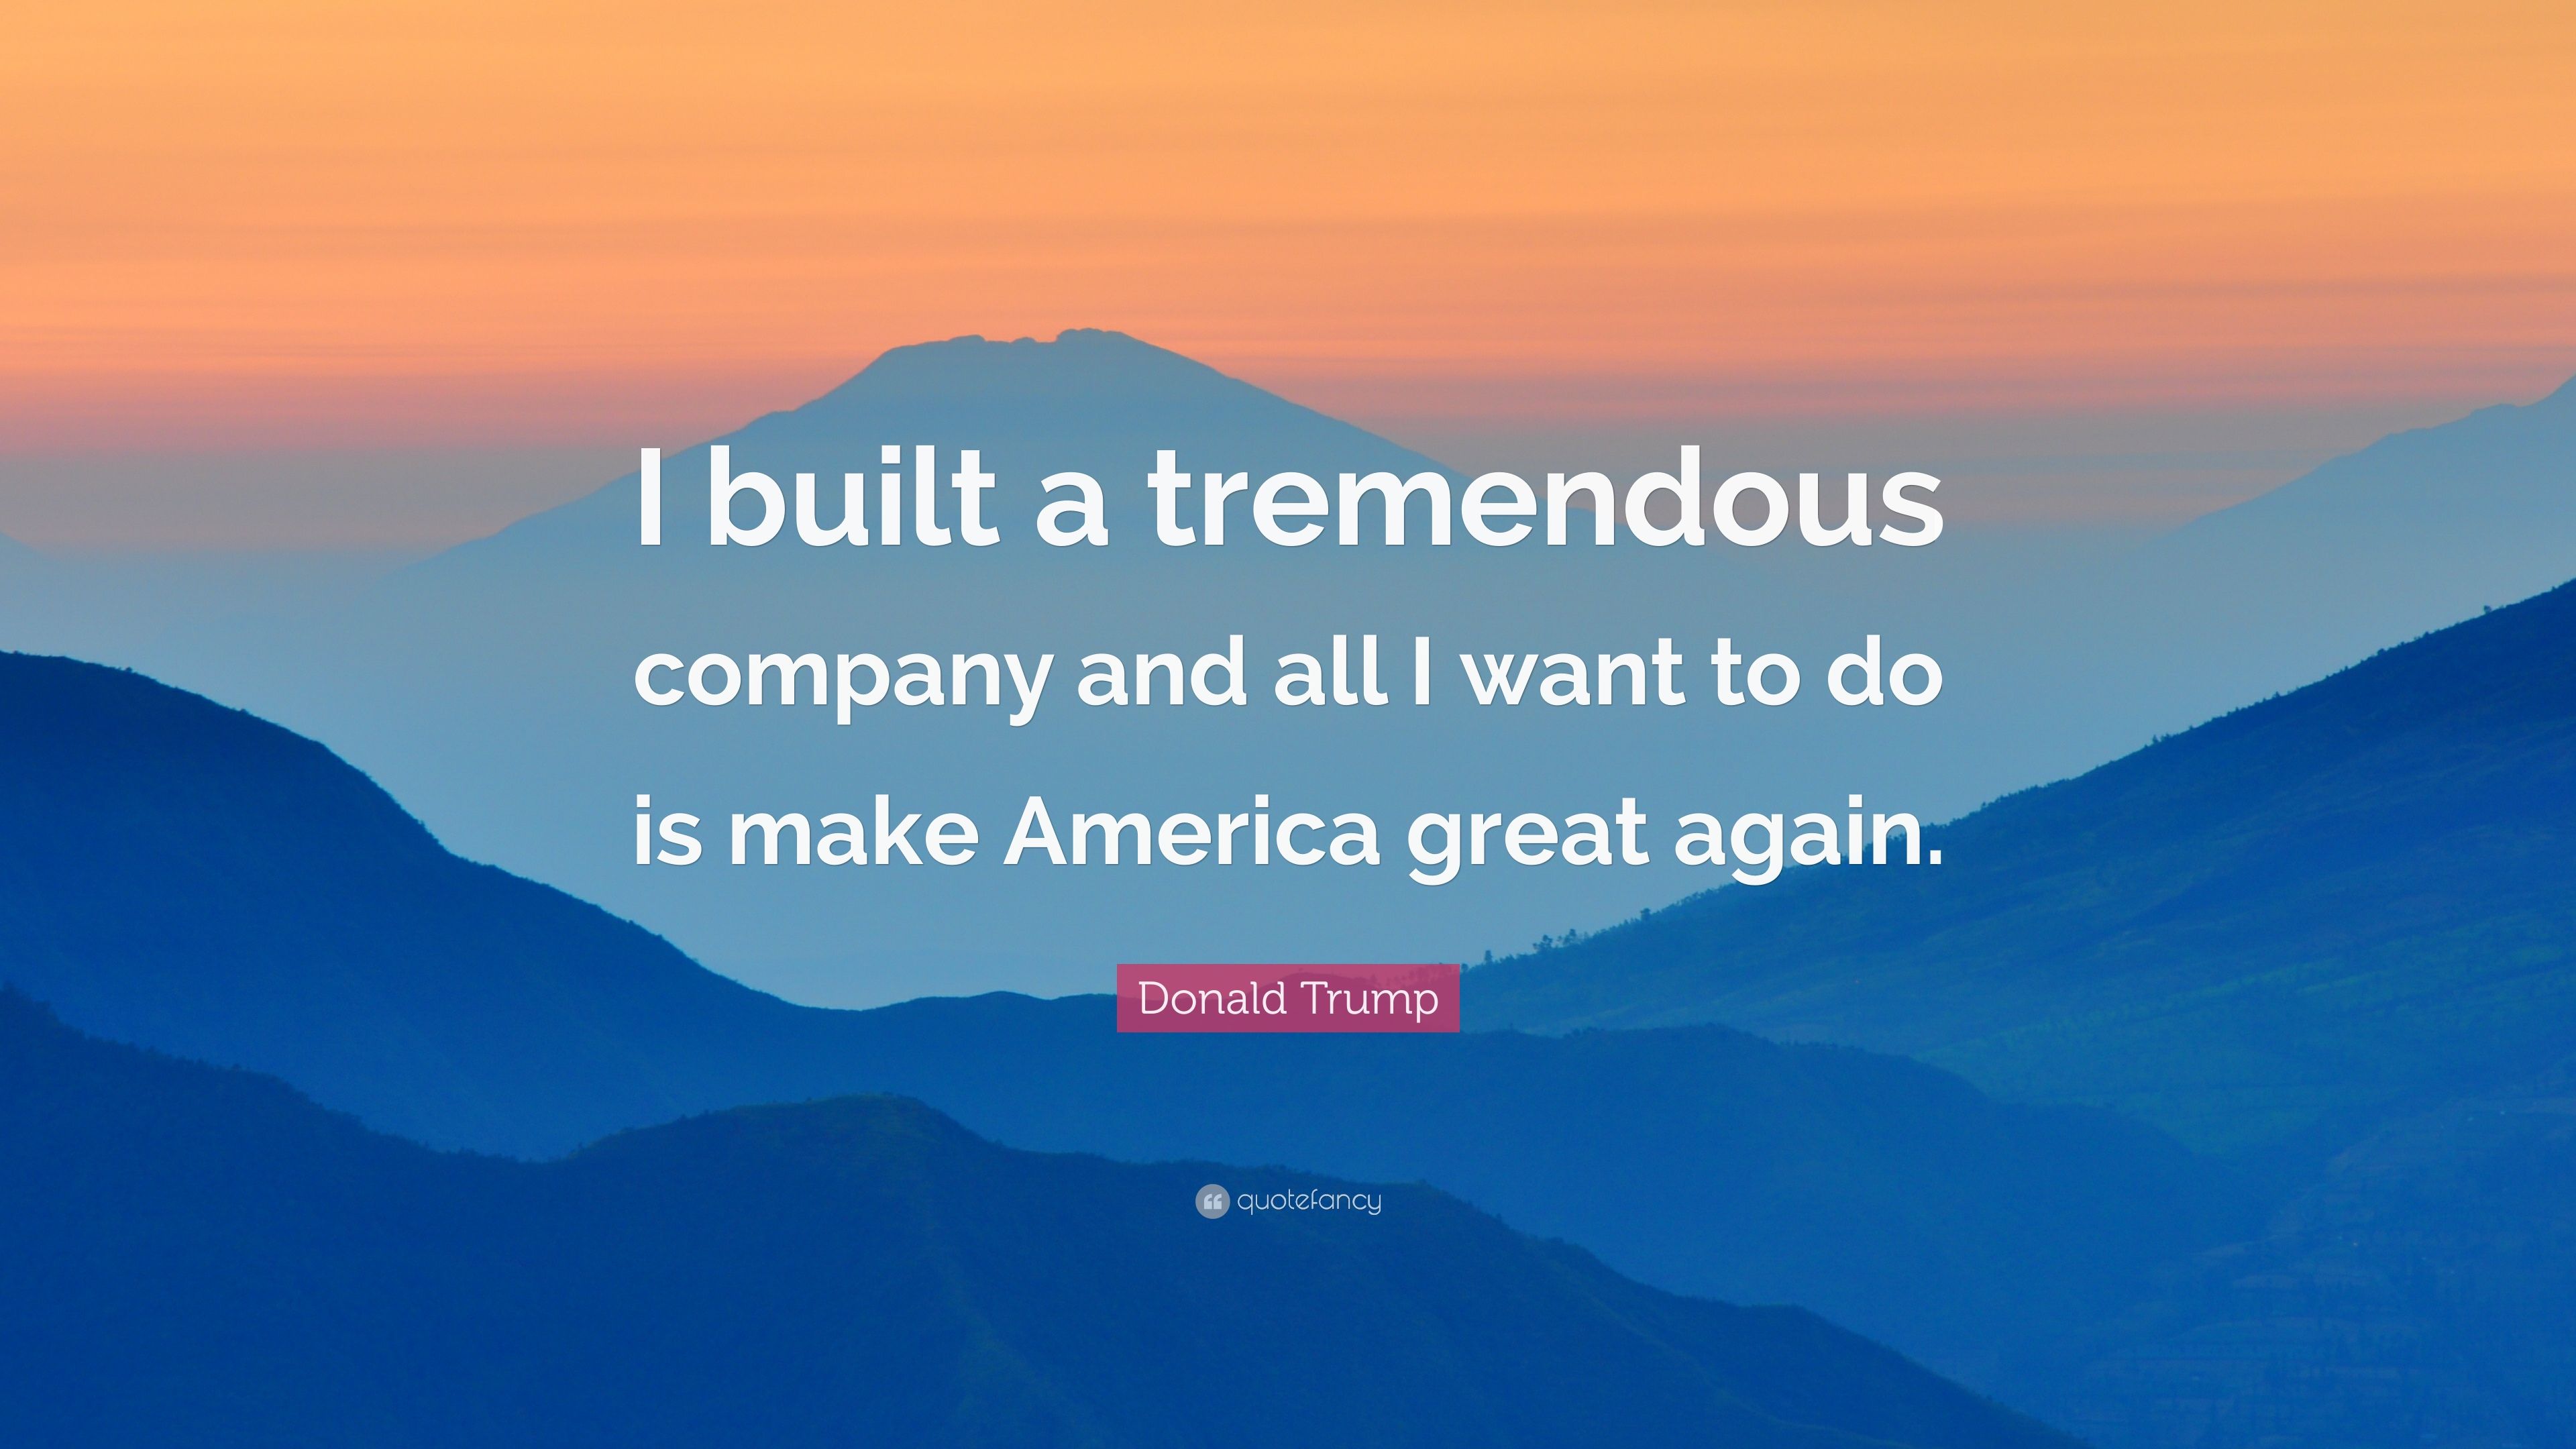 Donald Trump Quote: “I built a tremendous company and all I want